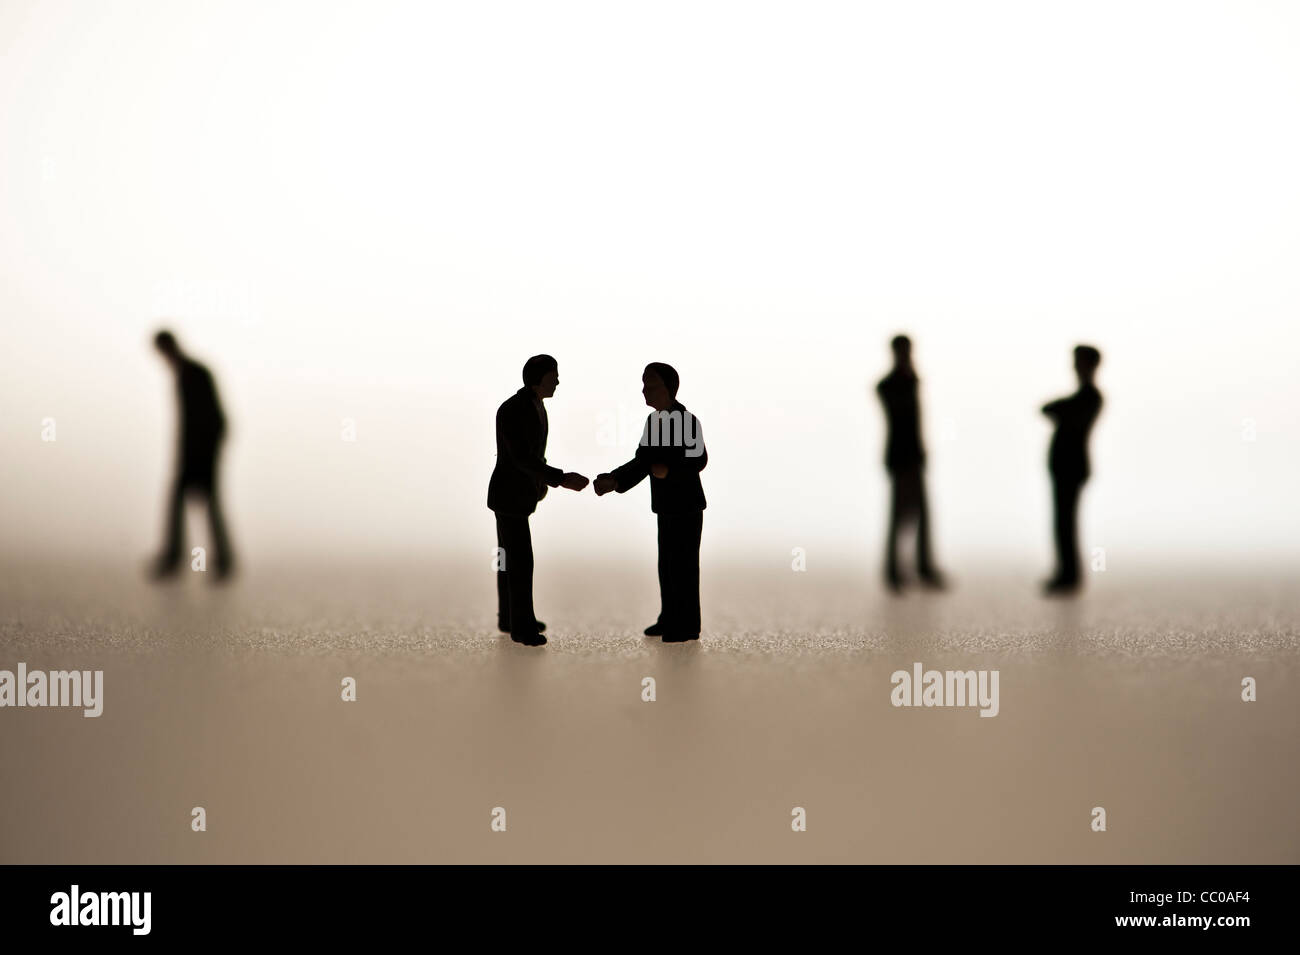 silhouetted small figures conceptual image for business men meeting talking conversation Stock Photo